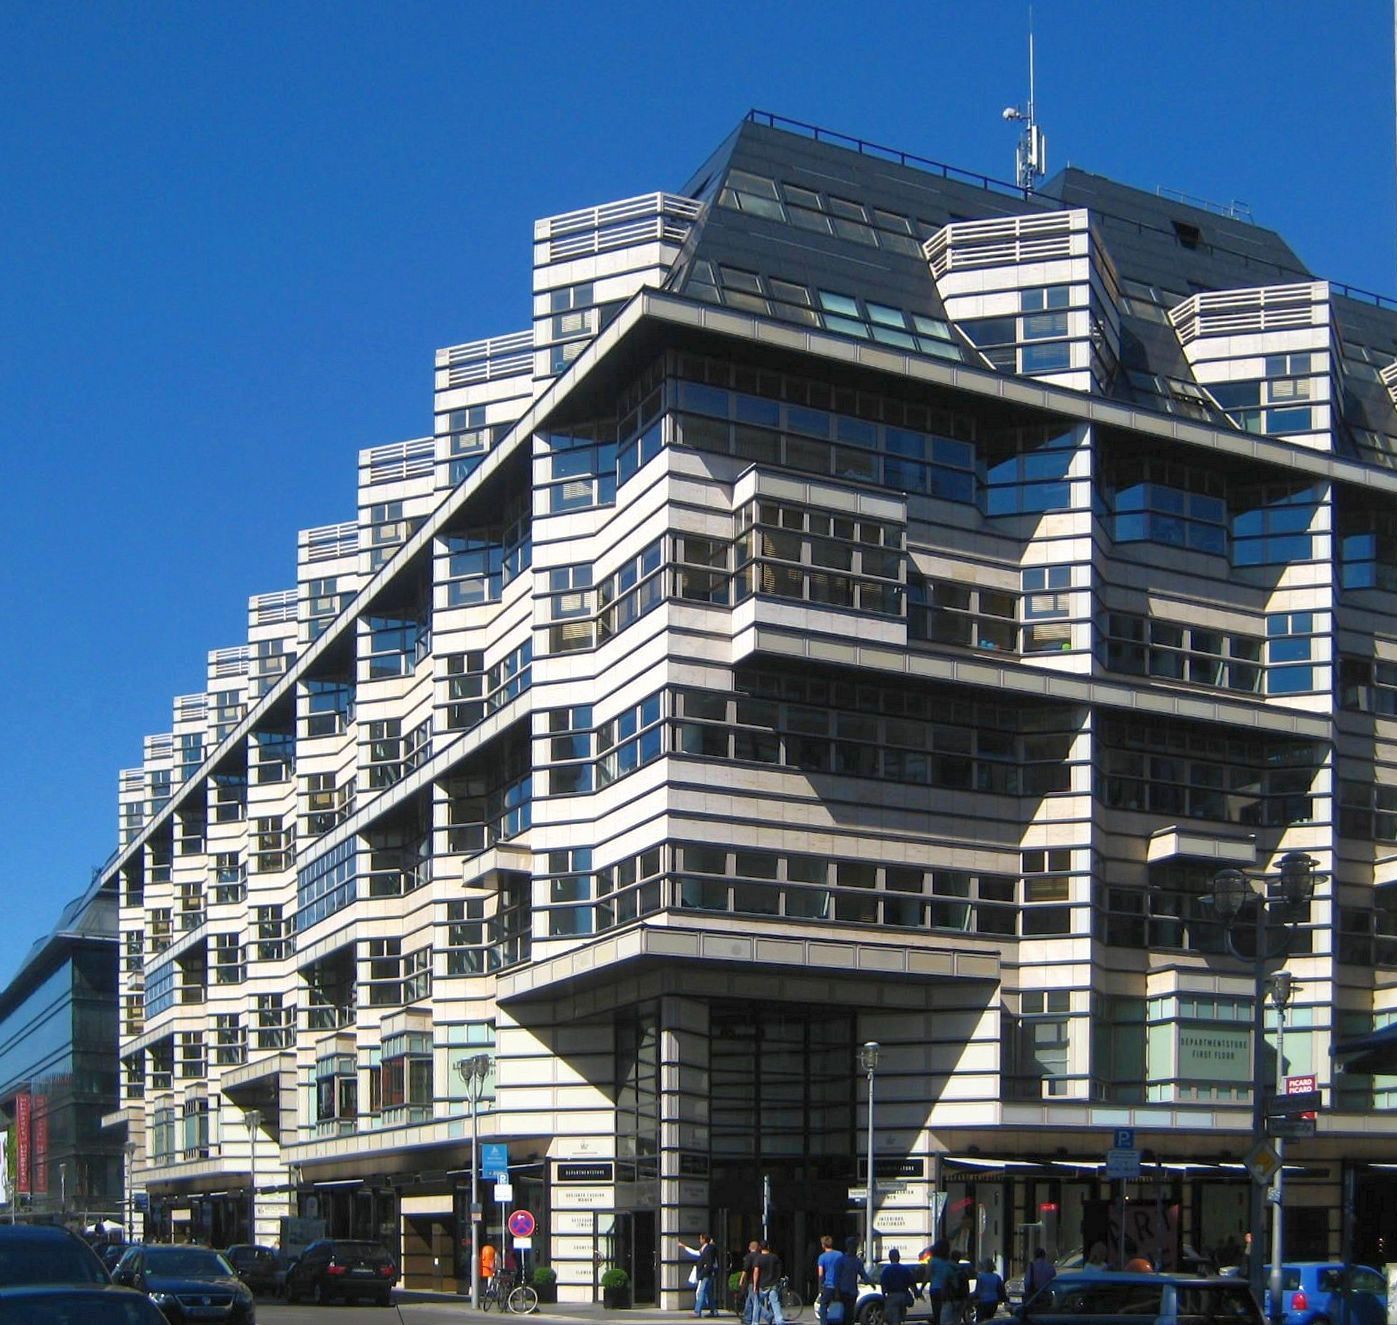 The Quartier 206 at Friedrichstraße No. 71-74 in Berlin-Mitte. The building was constructed from 199...